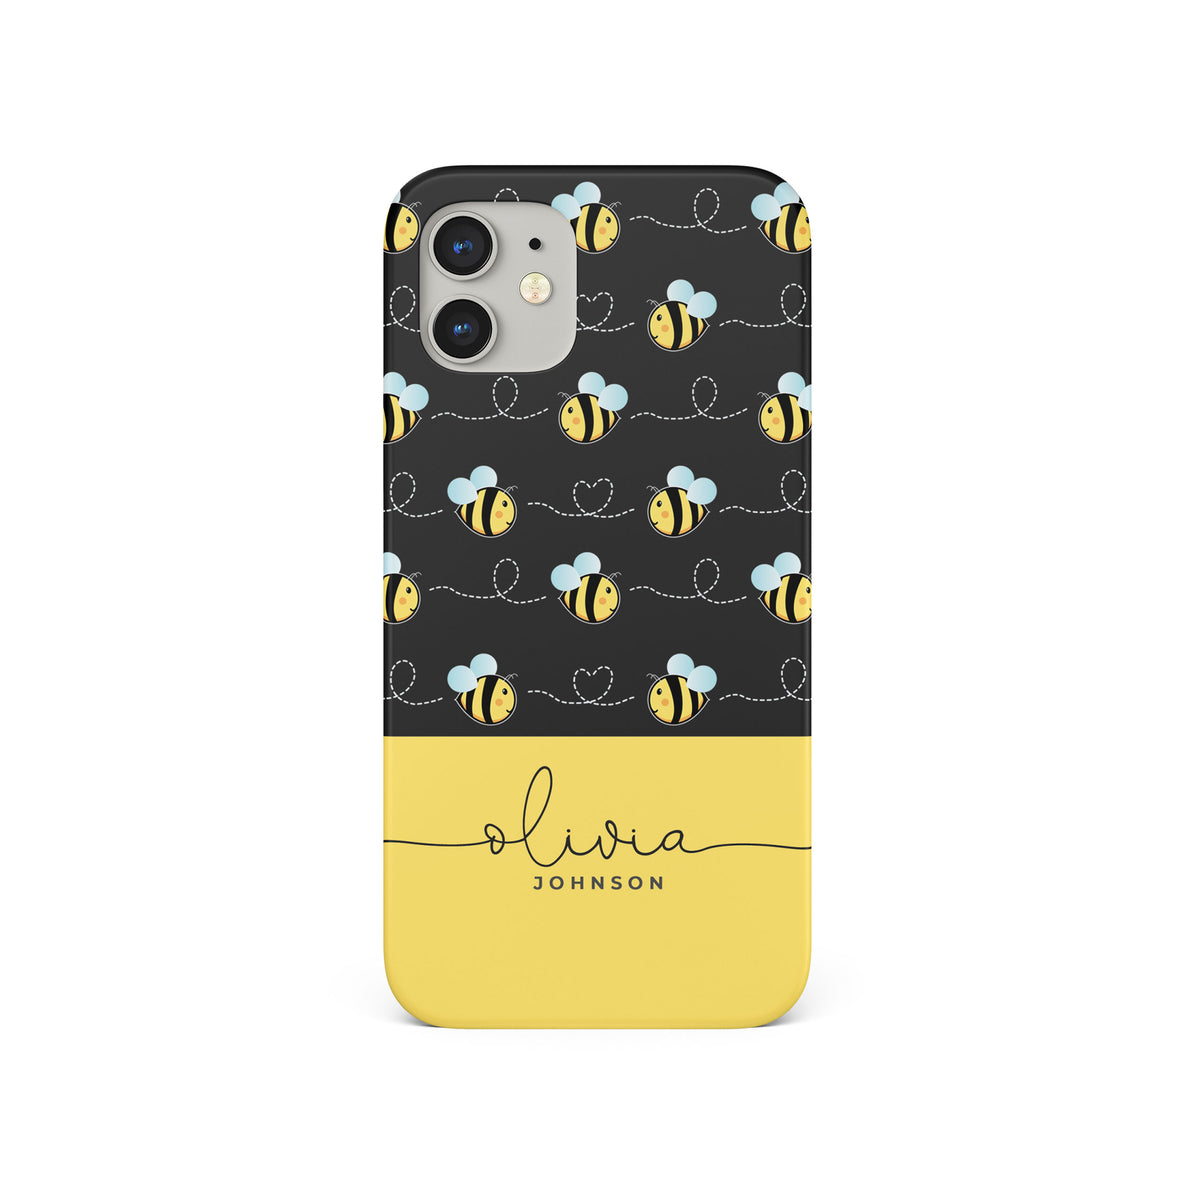 Personalised Hard Phone Case Custom Name Black Yellow Busy Bees